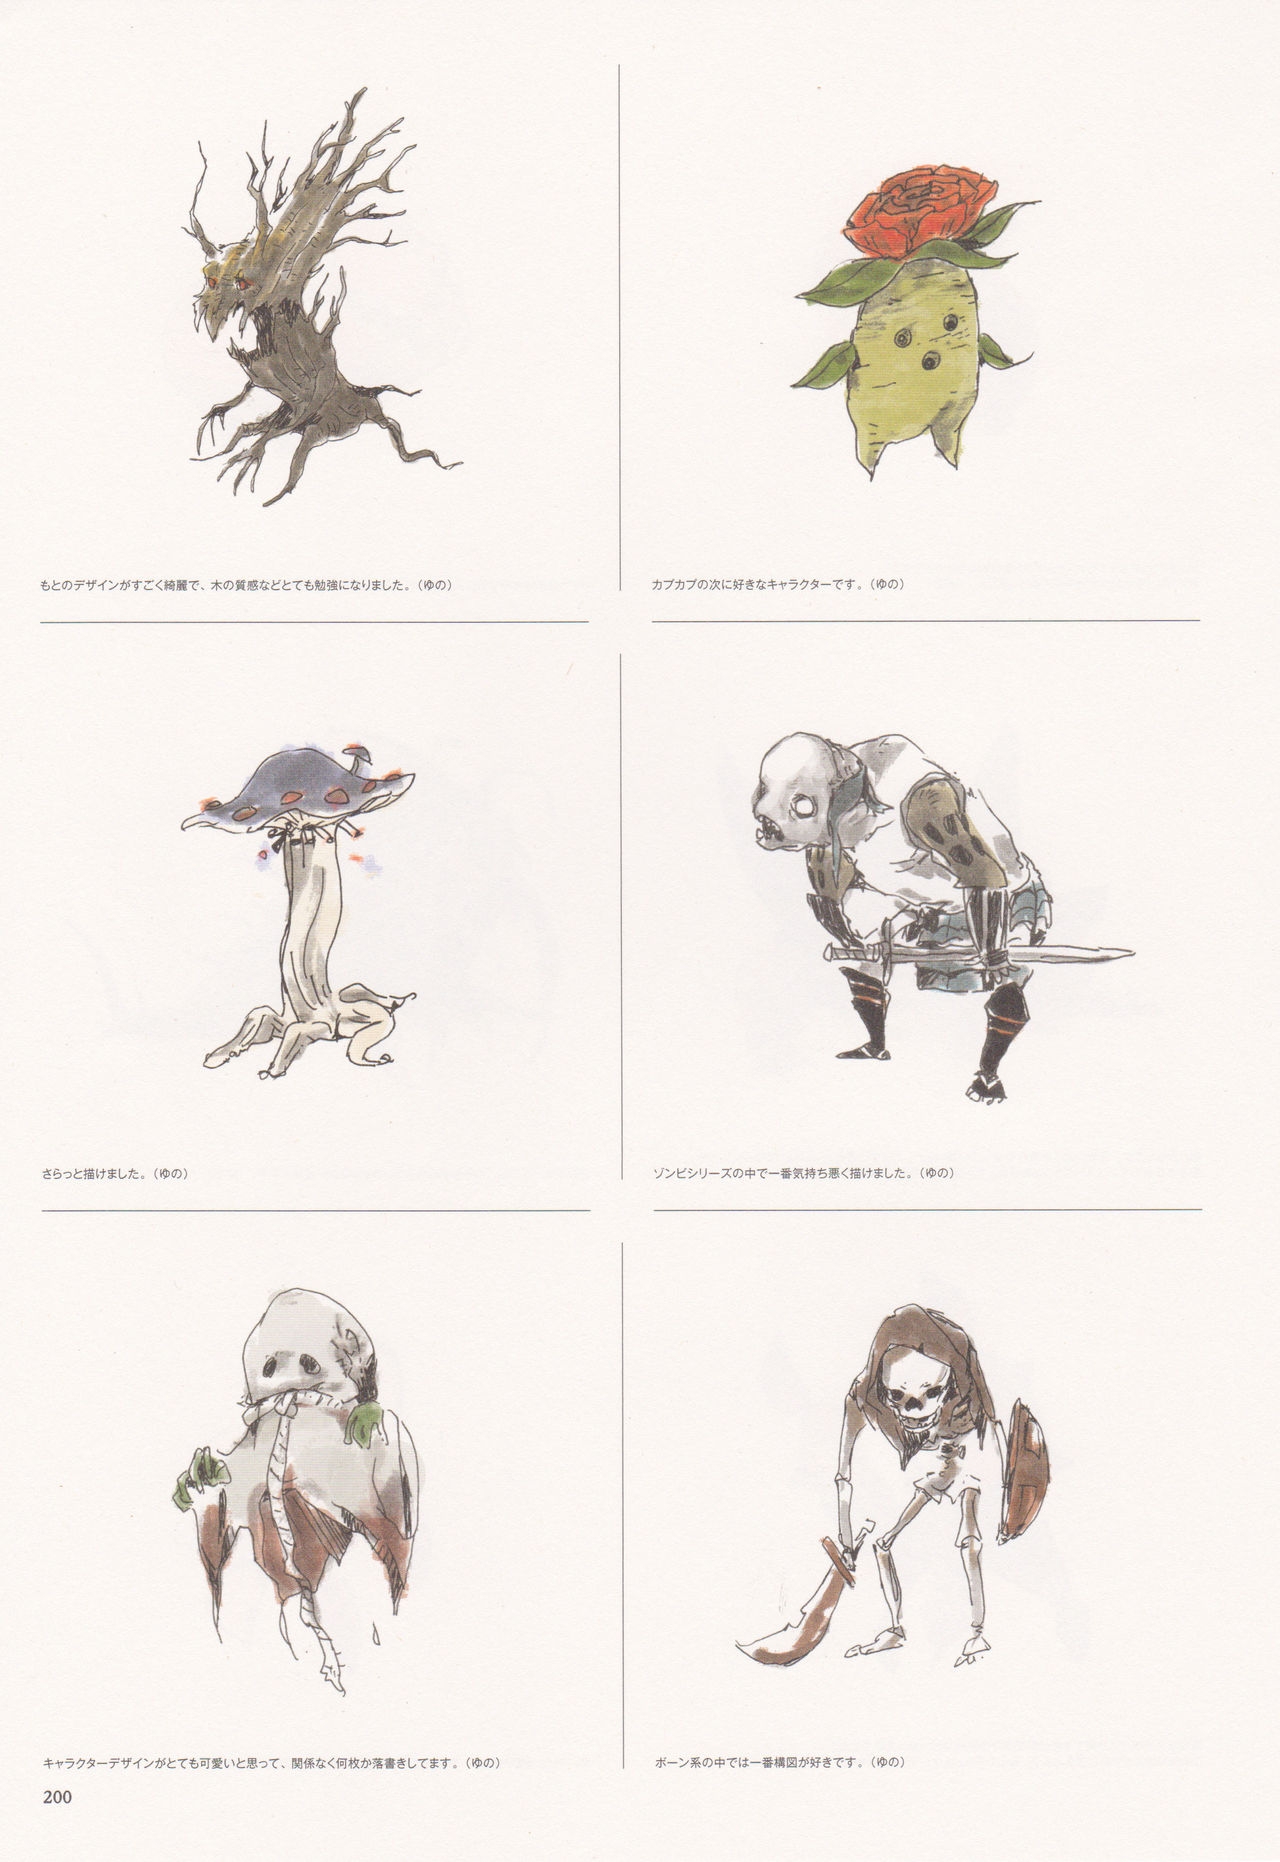 Bravely Second - End Layer - Design Works THE ART OF BRAVELY 2013-2015 200